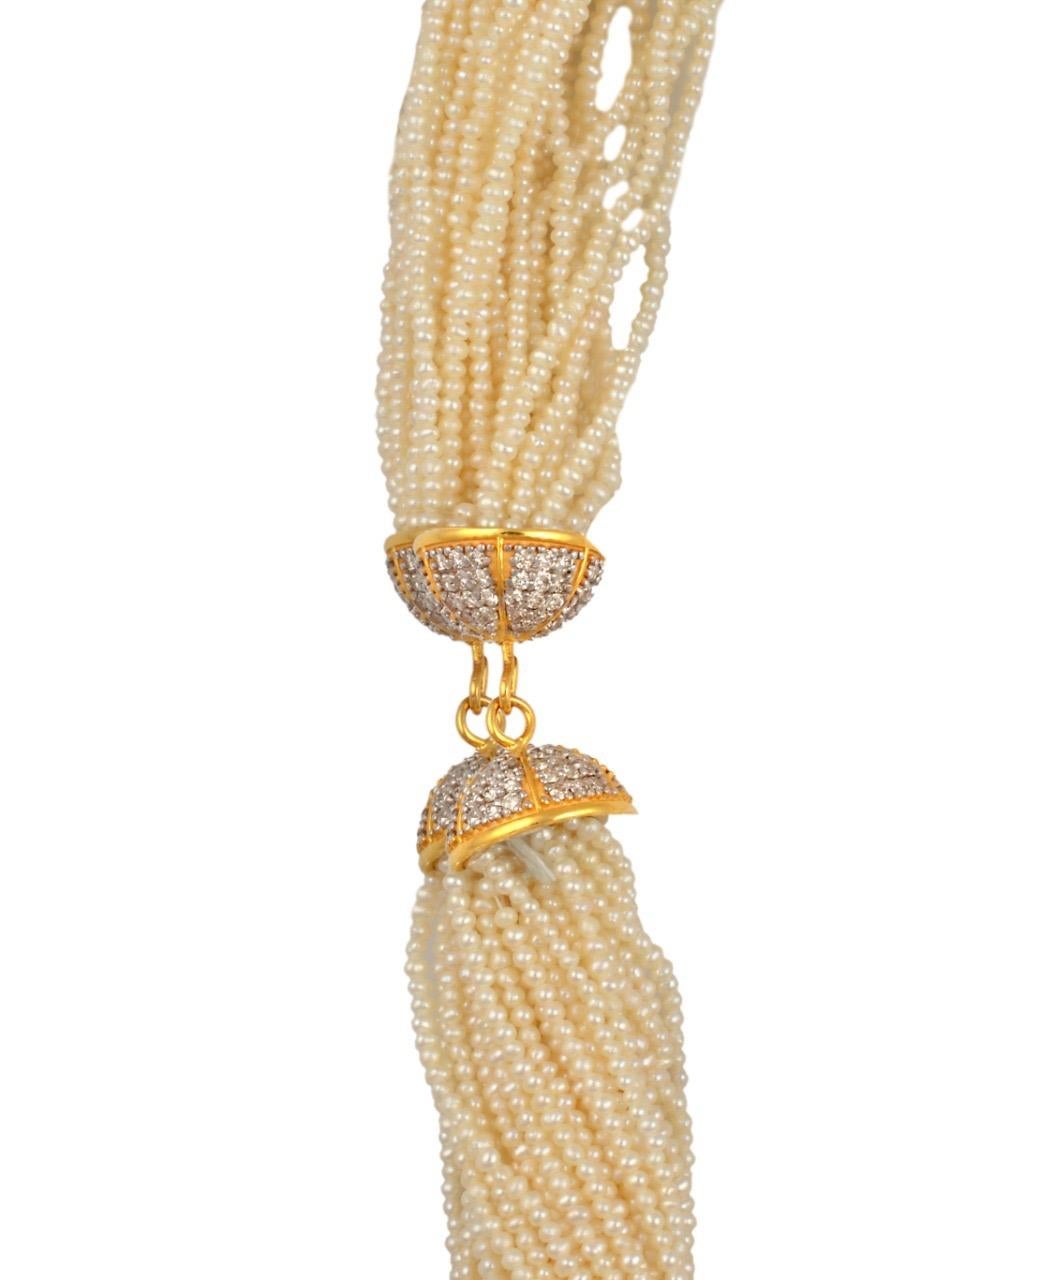 Women's 400 Carat Seed Pearl Necklace with Diamond & 14 Karat Yellow Gold Bell Cap Clasp For Sale